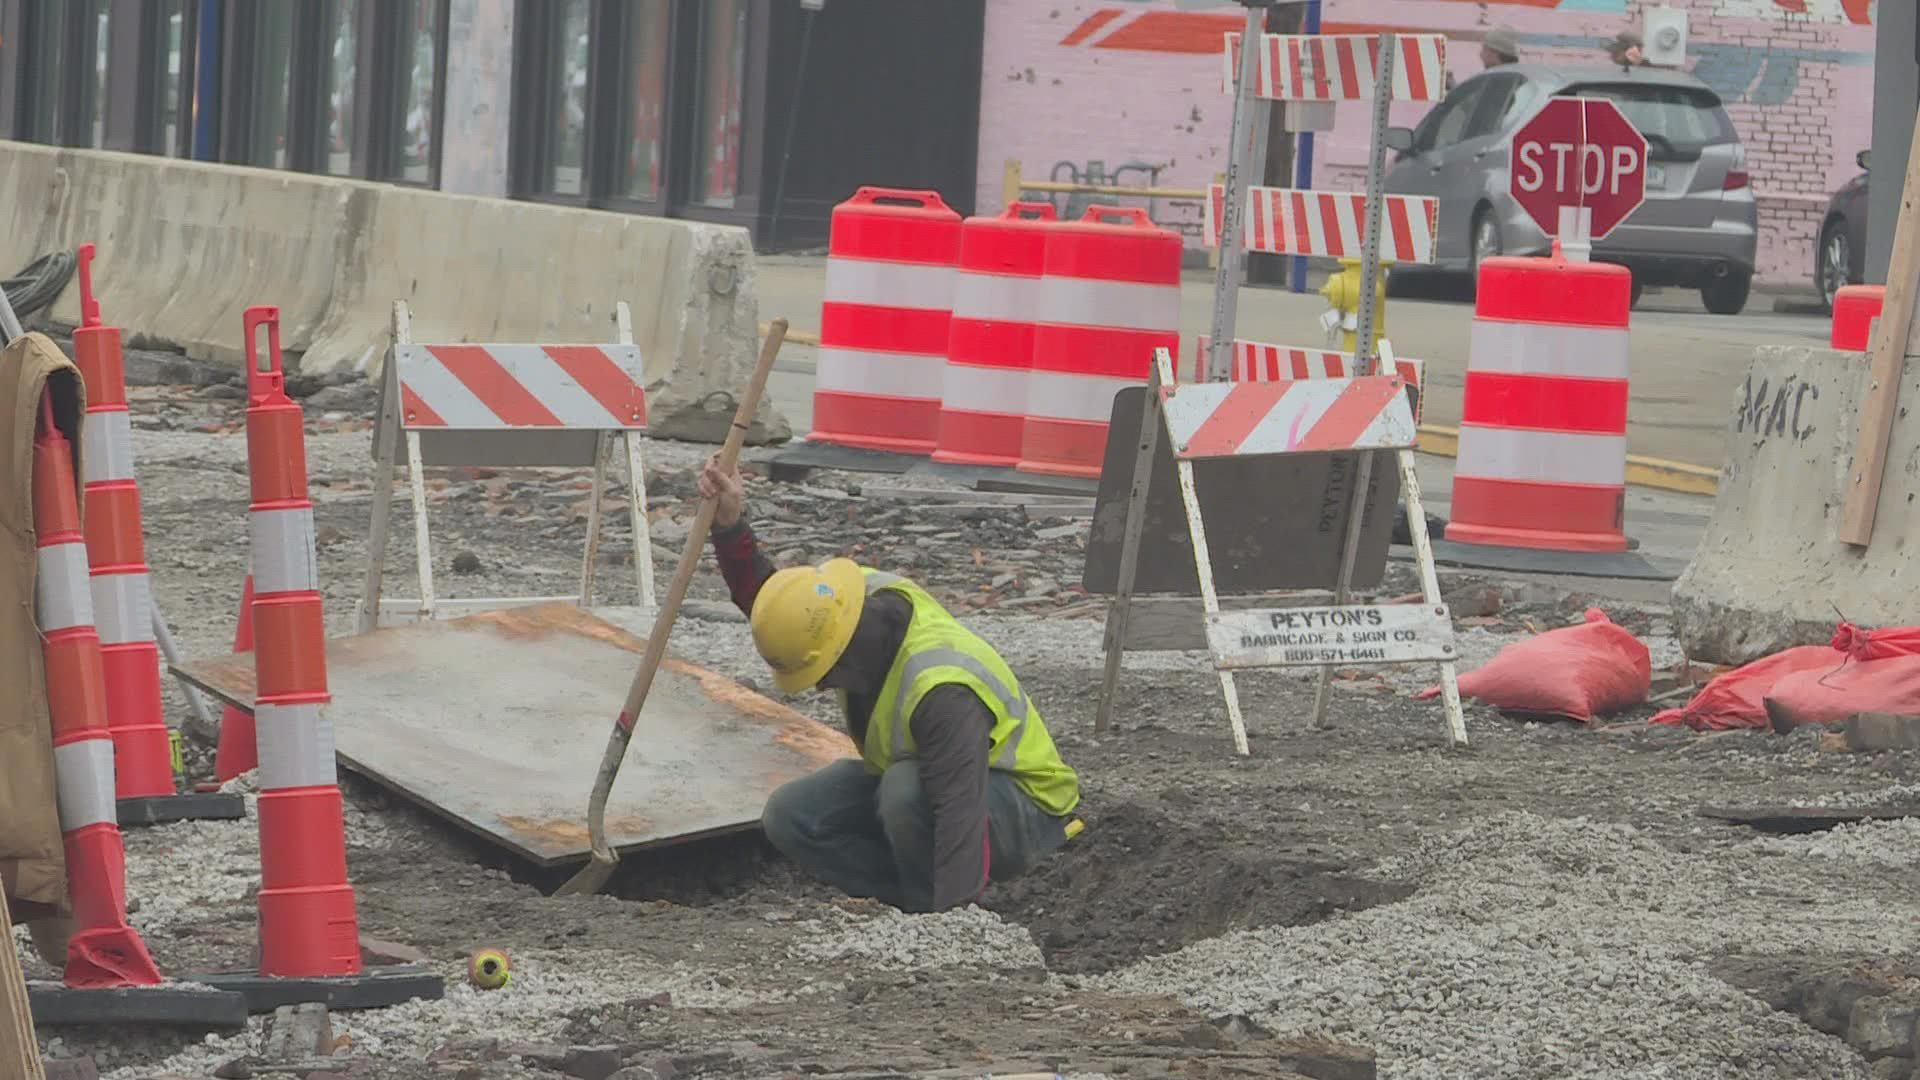 The work is apart of the city's $5.5 million Main Street Revitalization Project.